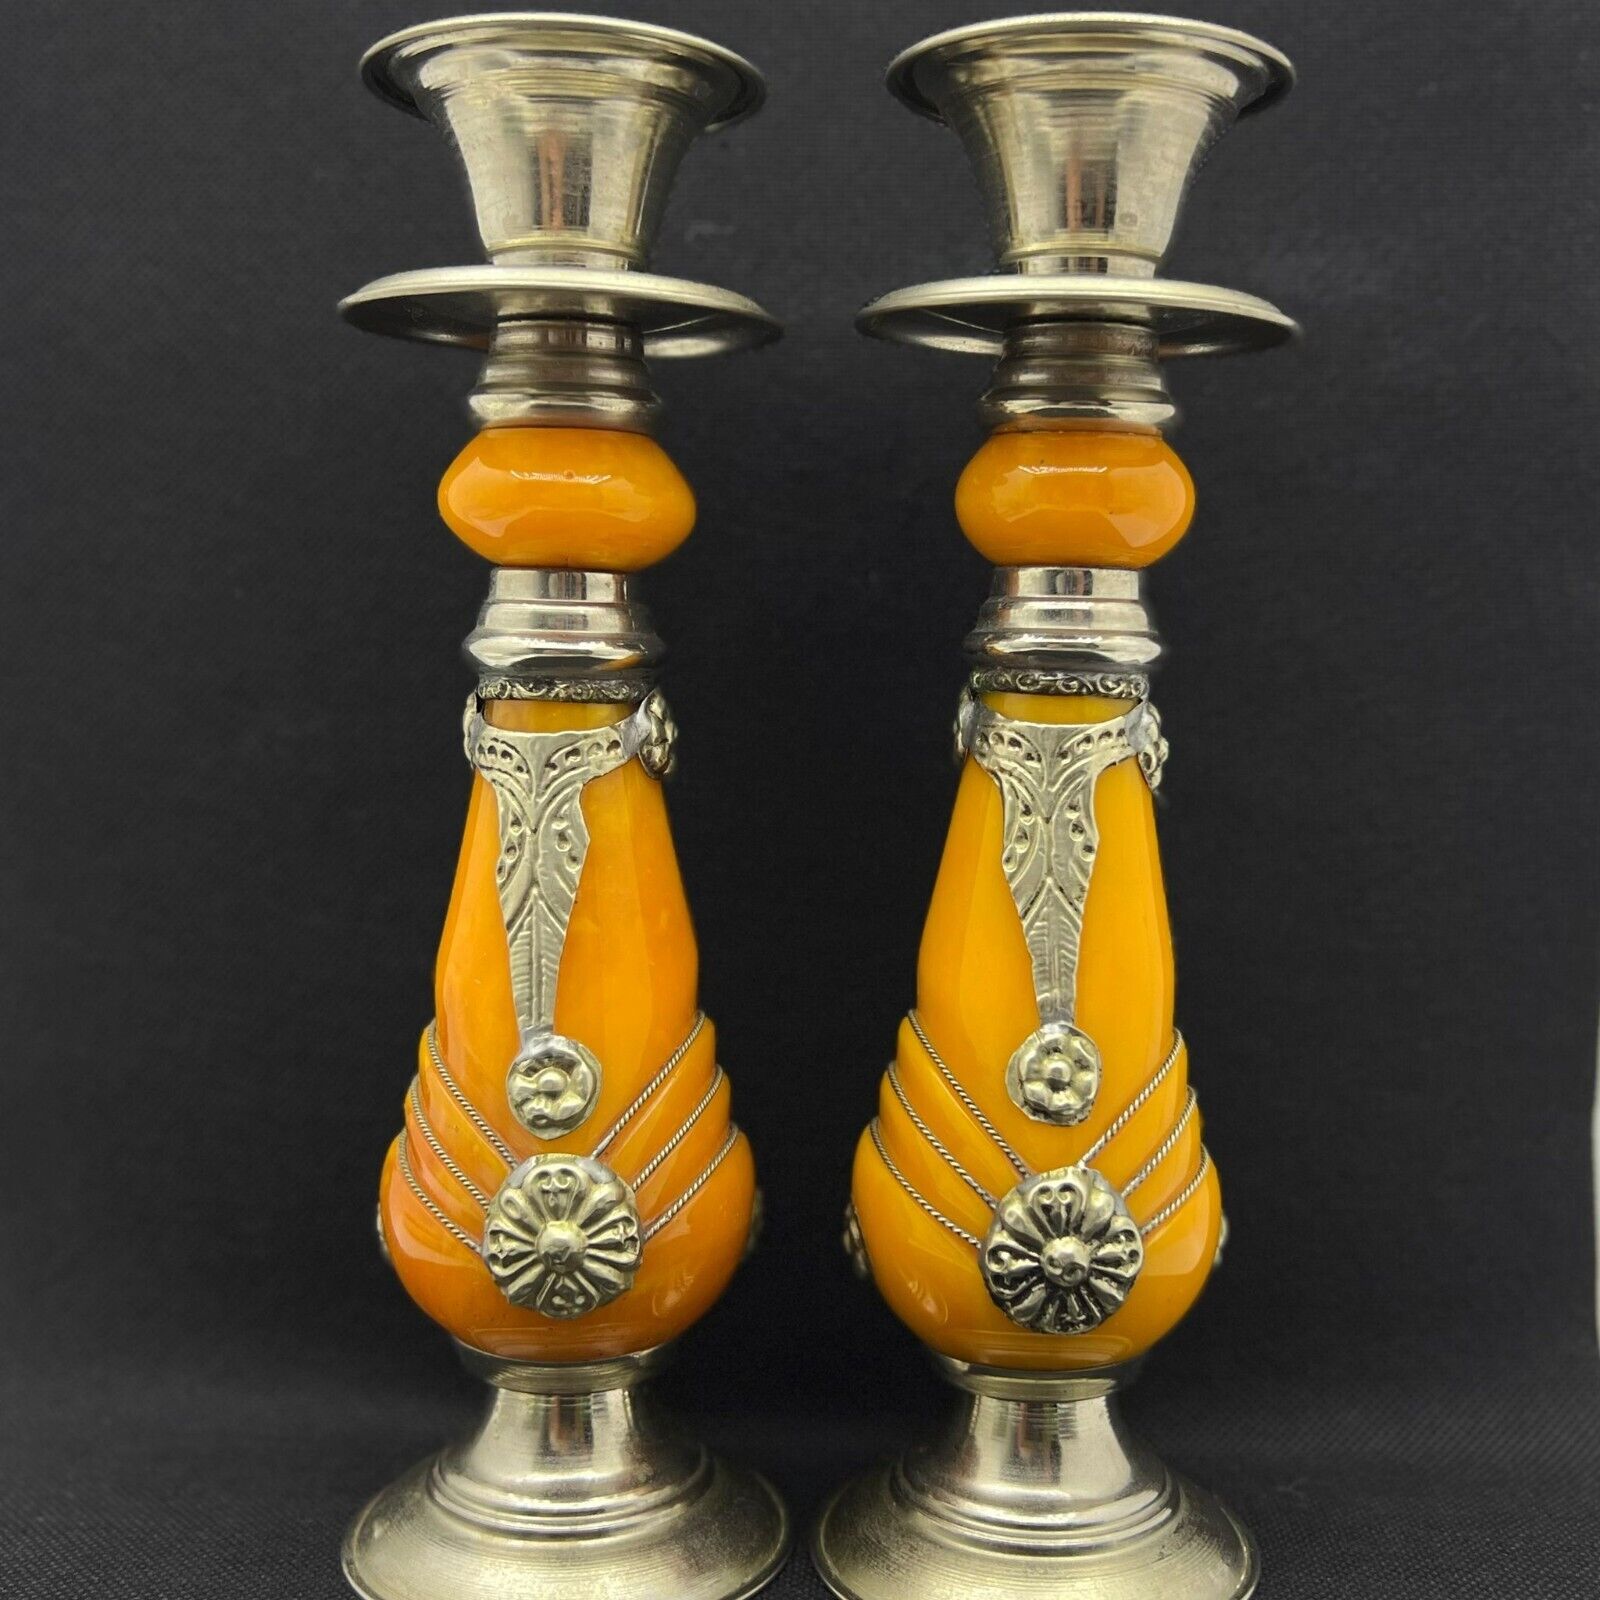 Vintage 2 Pcs Candle Holders Collectibles  Moroccan Hand Made Resin Home Decor